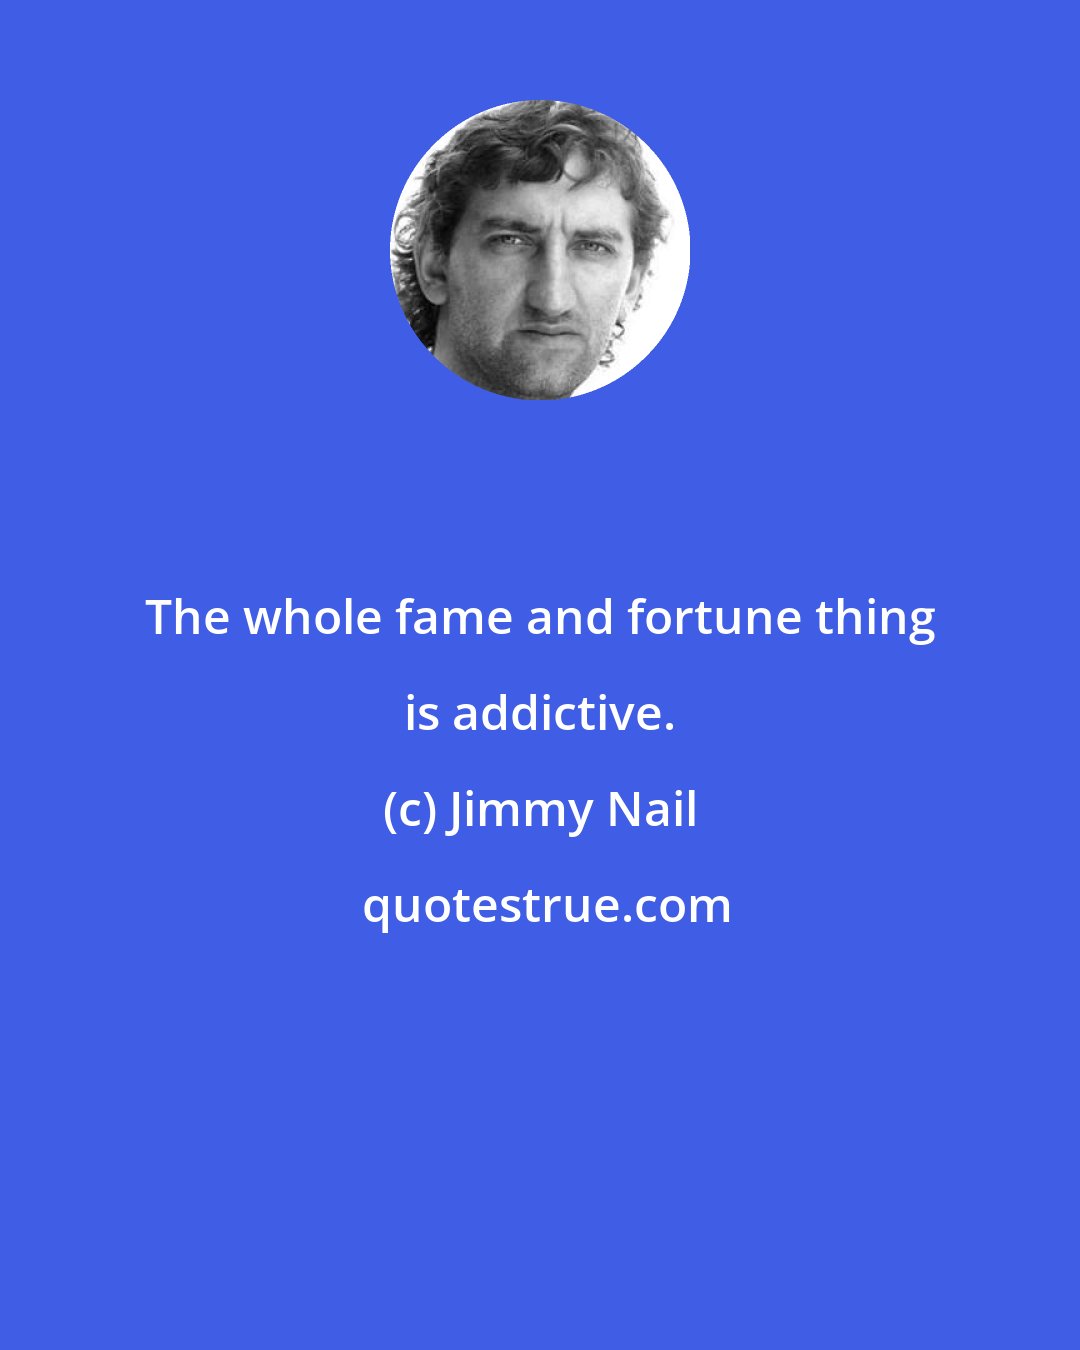 Jimmy Nail: The whole fame and fortune thing is addictive.